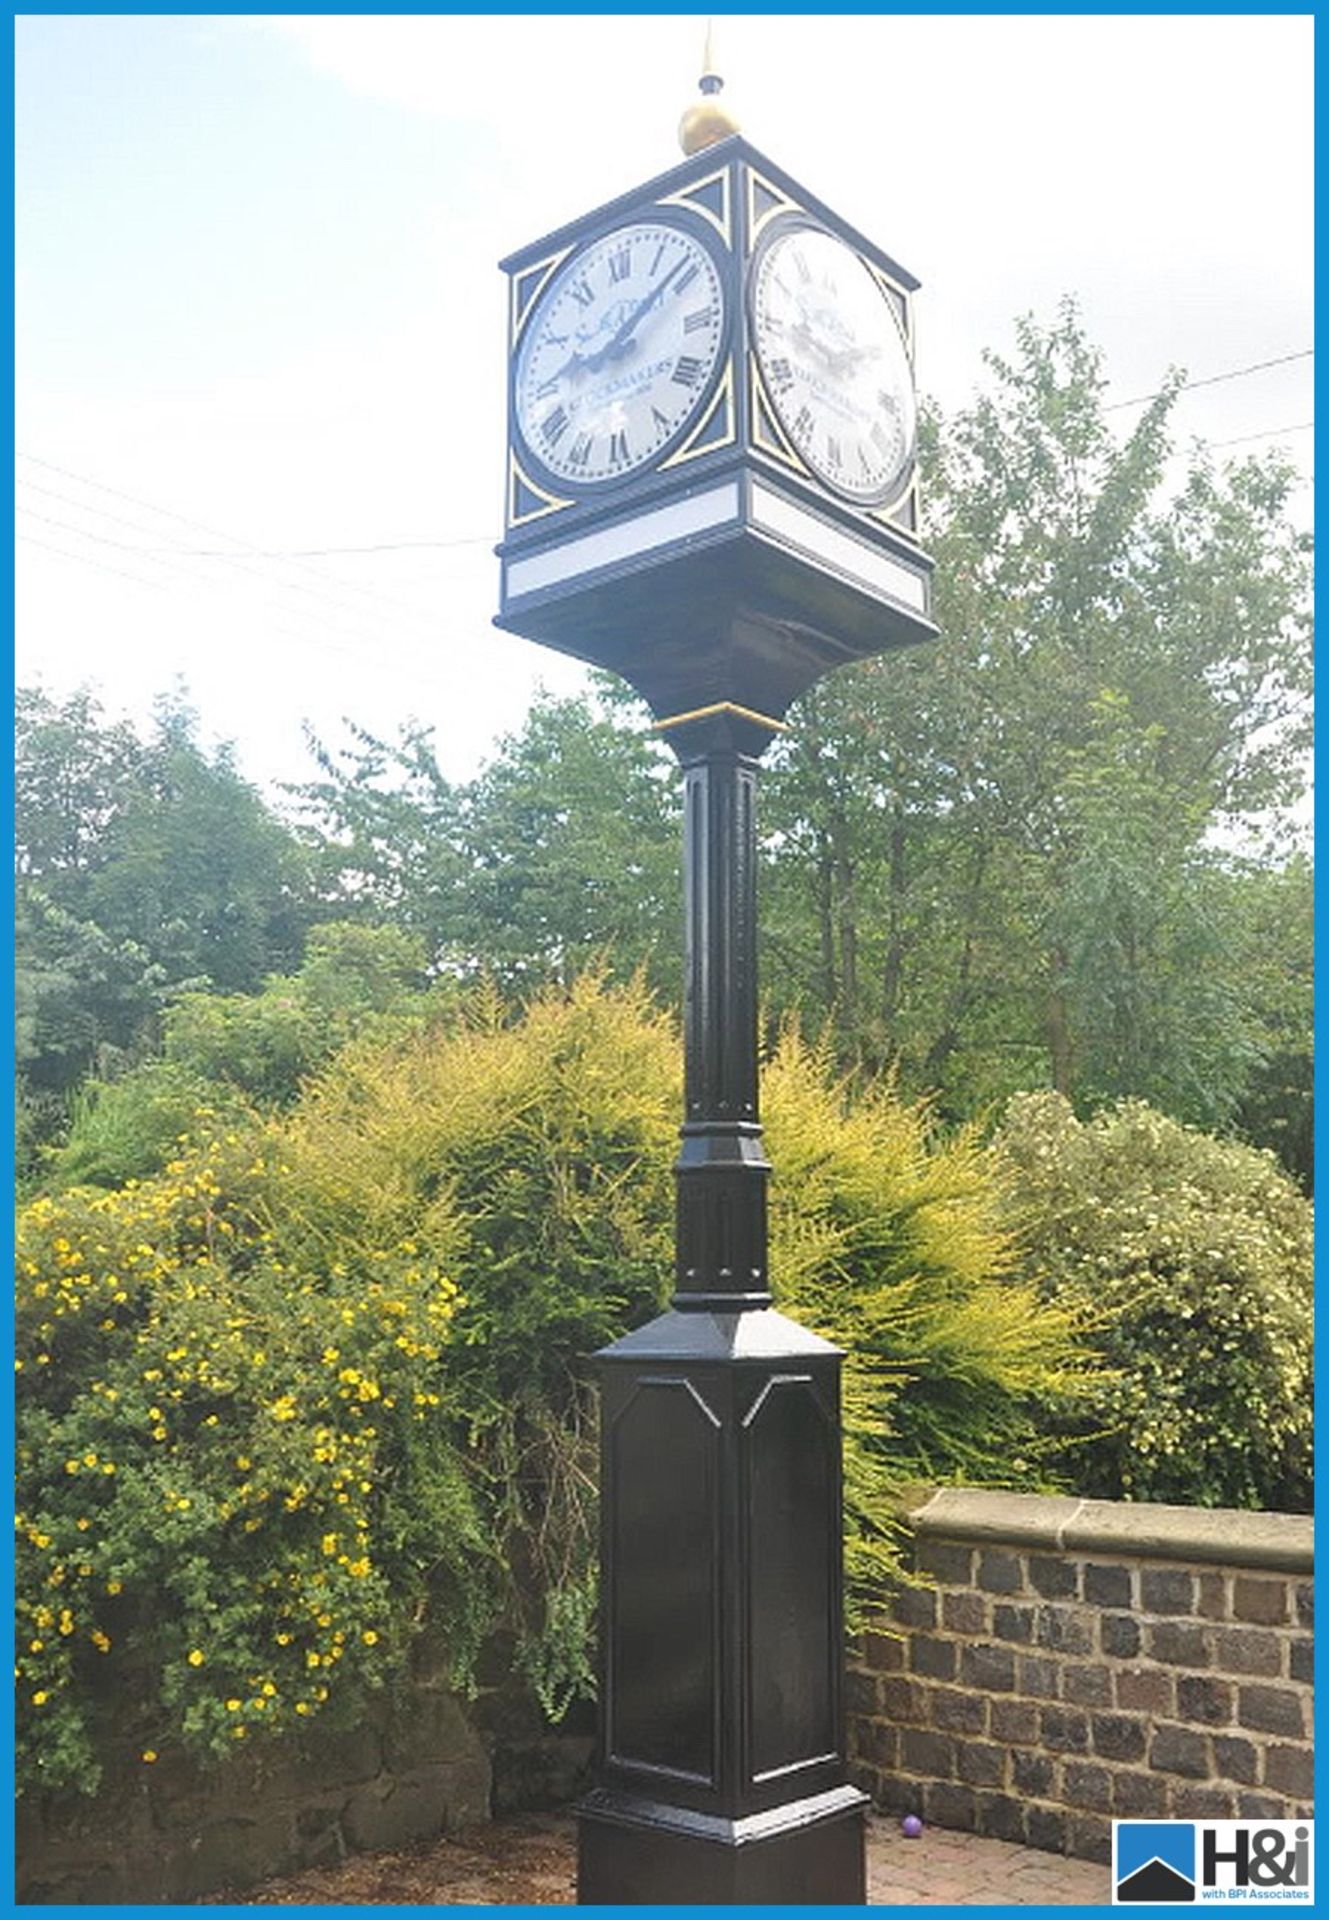 Superb Outdoor Pillar Clock made by Smith of Derby, approx. 20 years old. 'Boston 2' model. (See